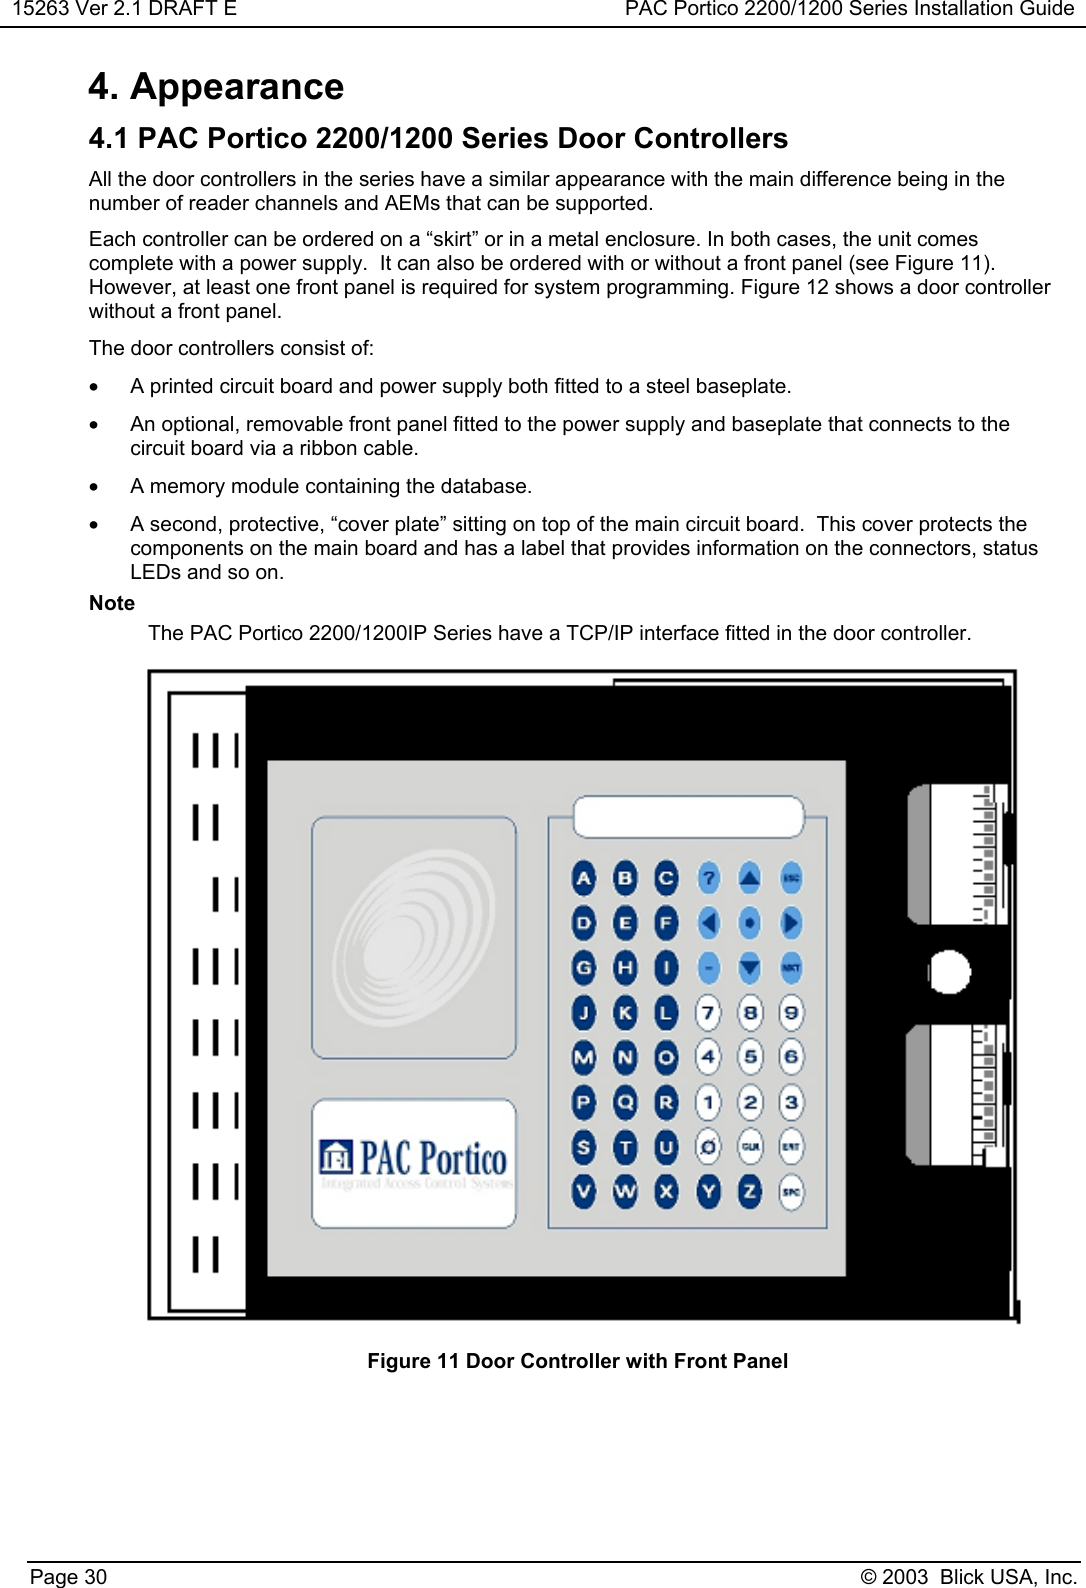 15263 Ver 2.1 DRAFT E PAC Portico 2200/1200 Series Installation GuidePage 30 © 2003  Blick USA, Inc.4. Appearance4.1 PAC Portico 2200/1200 Series Door ControllersAll the door controllers in the series have a similar appearance with the main difference being in thenumber of reader channels and AEMs that can be supported.Each controller can be ordered on a “skirt” or in a metal enclosure. In both cases, the unit comescomplete with a power supply.  It can also be ordered with or without a front panel (see Figure 11).However, at least one front panel is required for system programming. Figure 12 shows a door controllerwithout a front panel.The door controllers consist of:•  A printed circuit board and power supply both fitted to a steel baseplate.•  An optional, removable front panel fitted to the power supply and baseplate that connects to thecircuit board via a ribbon cable.•  A memory module containing the database.•  A second, protective, “cover plate” sitting on top of the main circuit board.  This cover protects thecomponents on the main board and has a label that provides information on the connectors, statusLEDs and so on.NoteThe PAC Portico 2200/1200IP Series have a TCP/IP interface fitted in the door controller.Figure 11 Door Controller with Front Panel